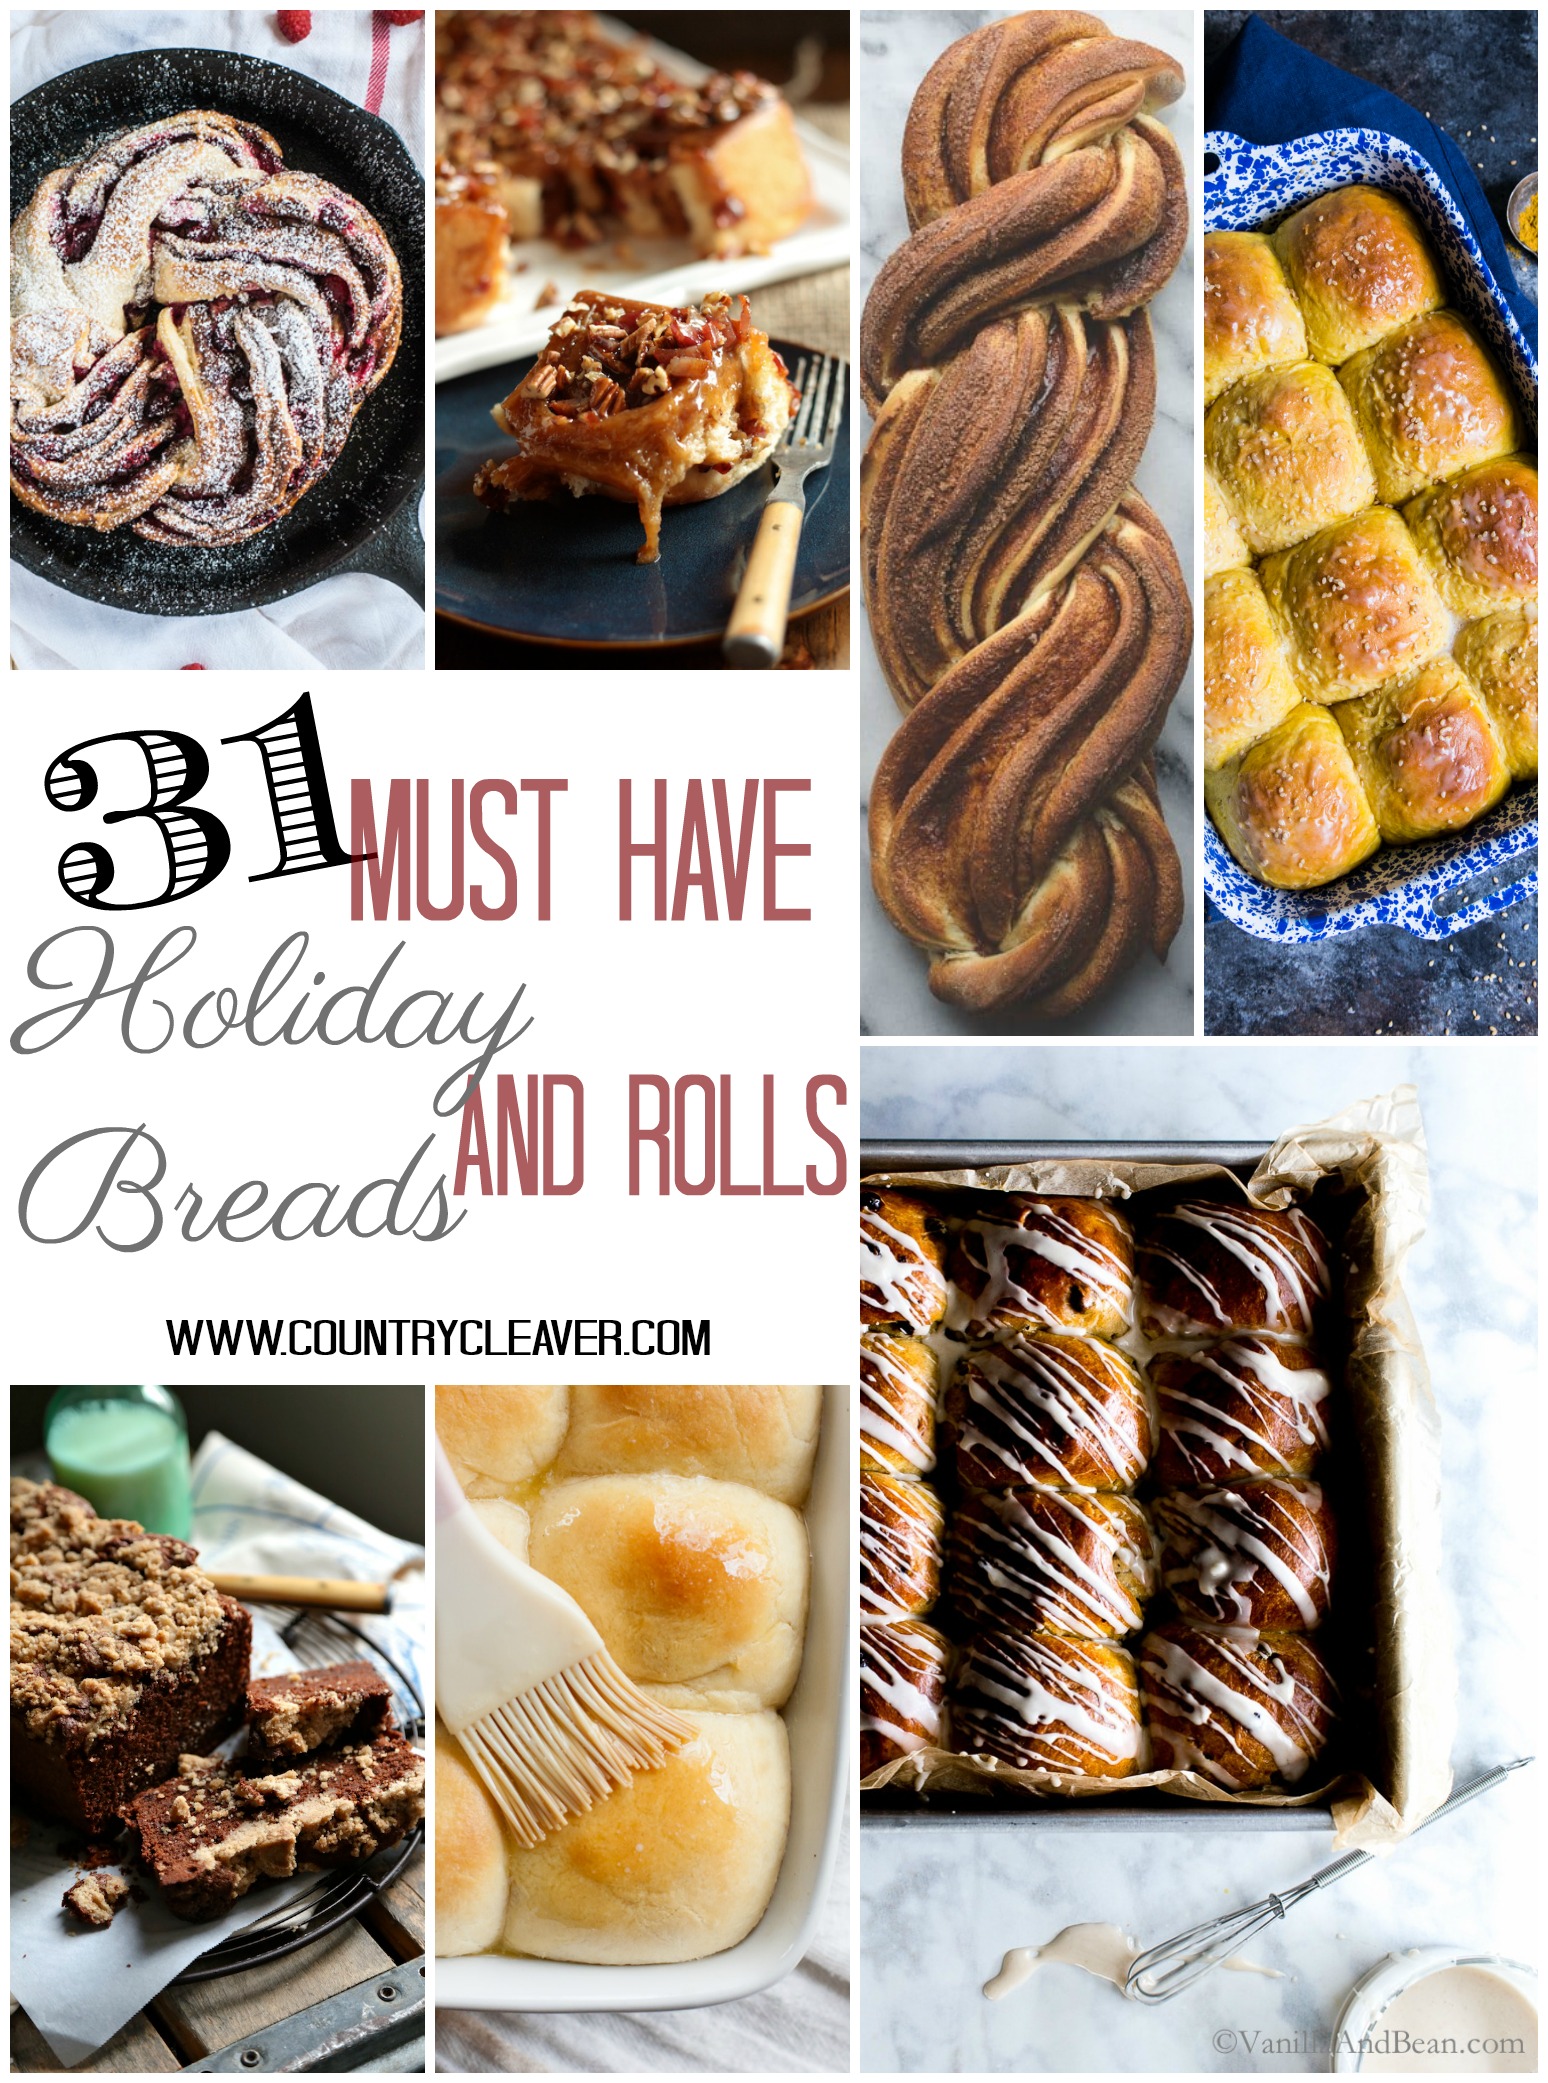 31 Must Have Holiday Breads and Rolls - www.countrycleaver.com